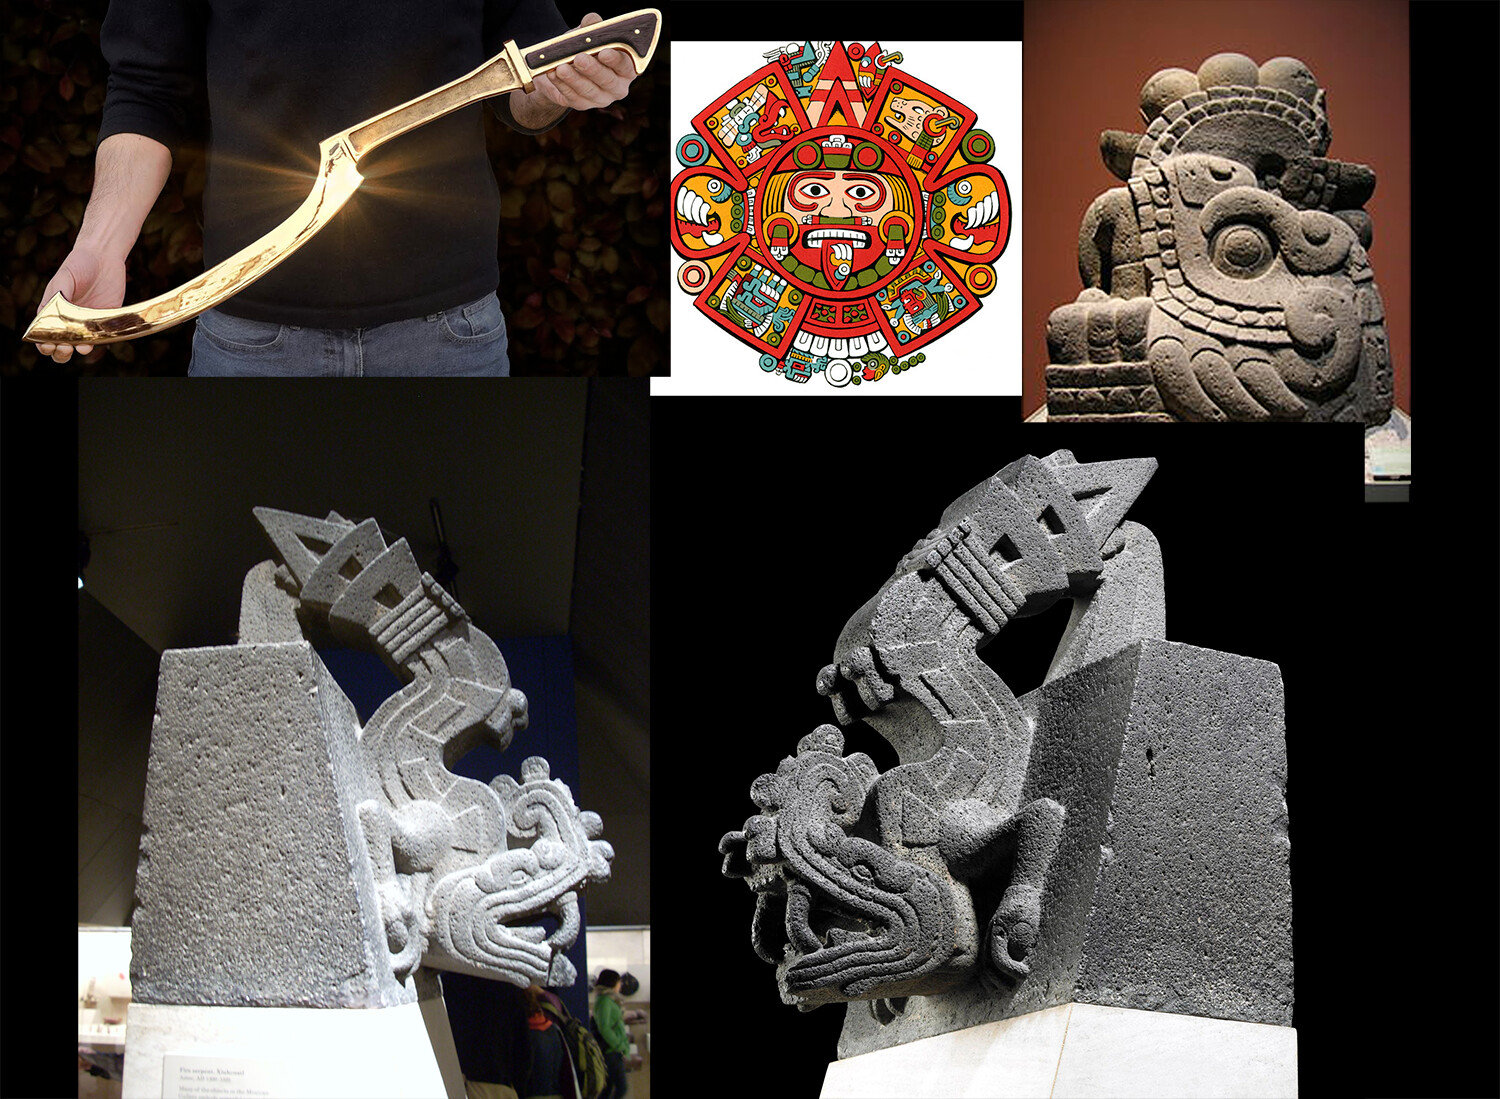 Reference images showing the sculptural influences and the color palette origin.